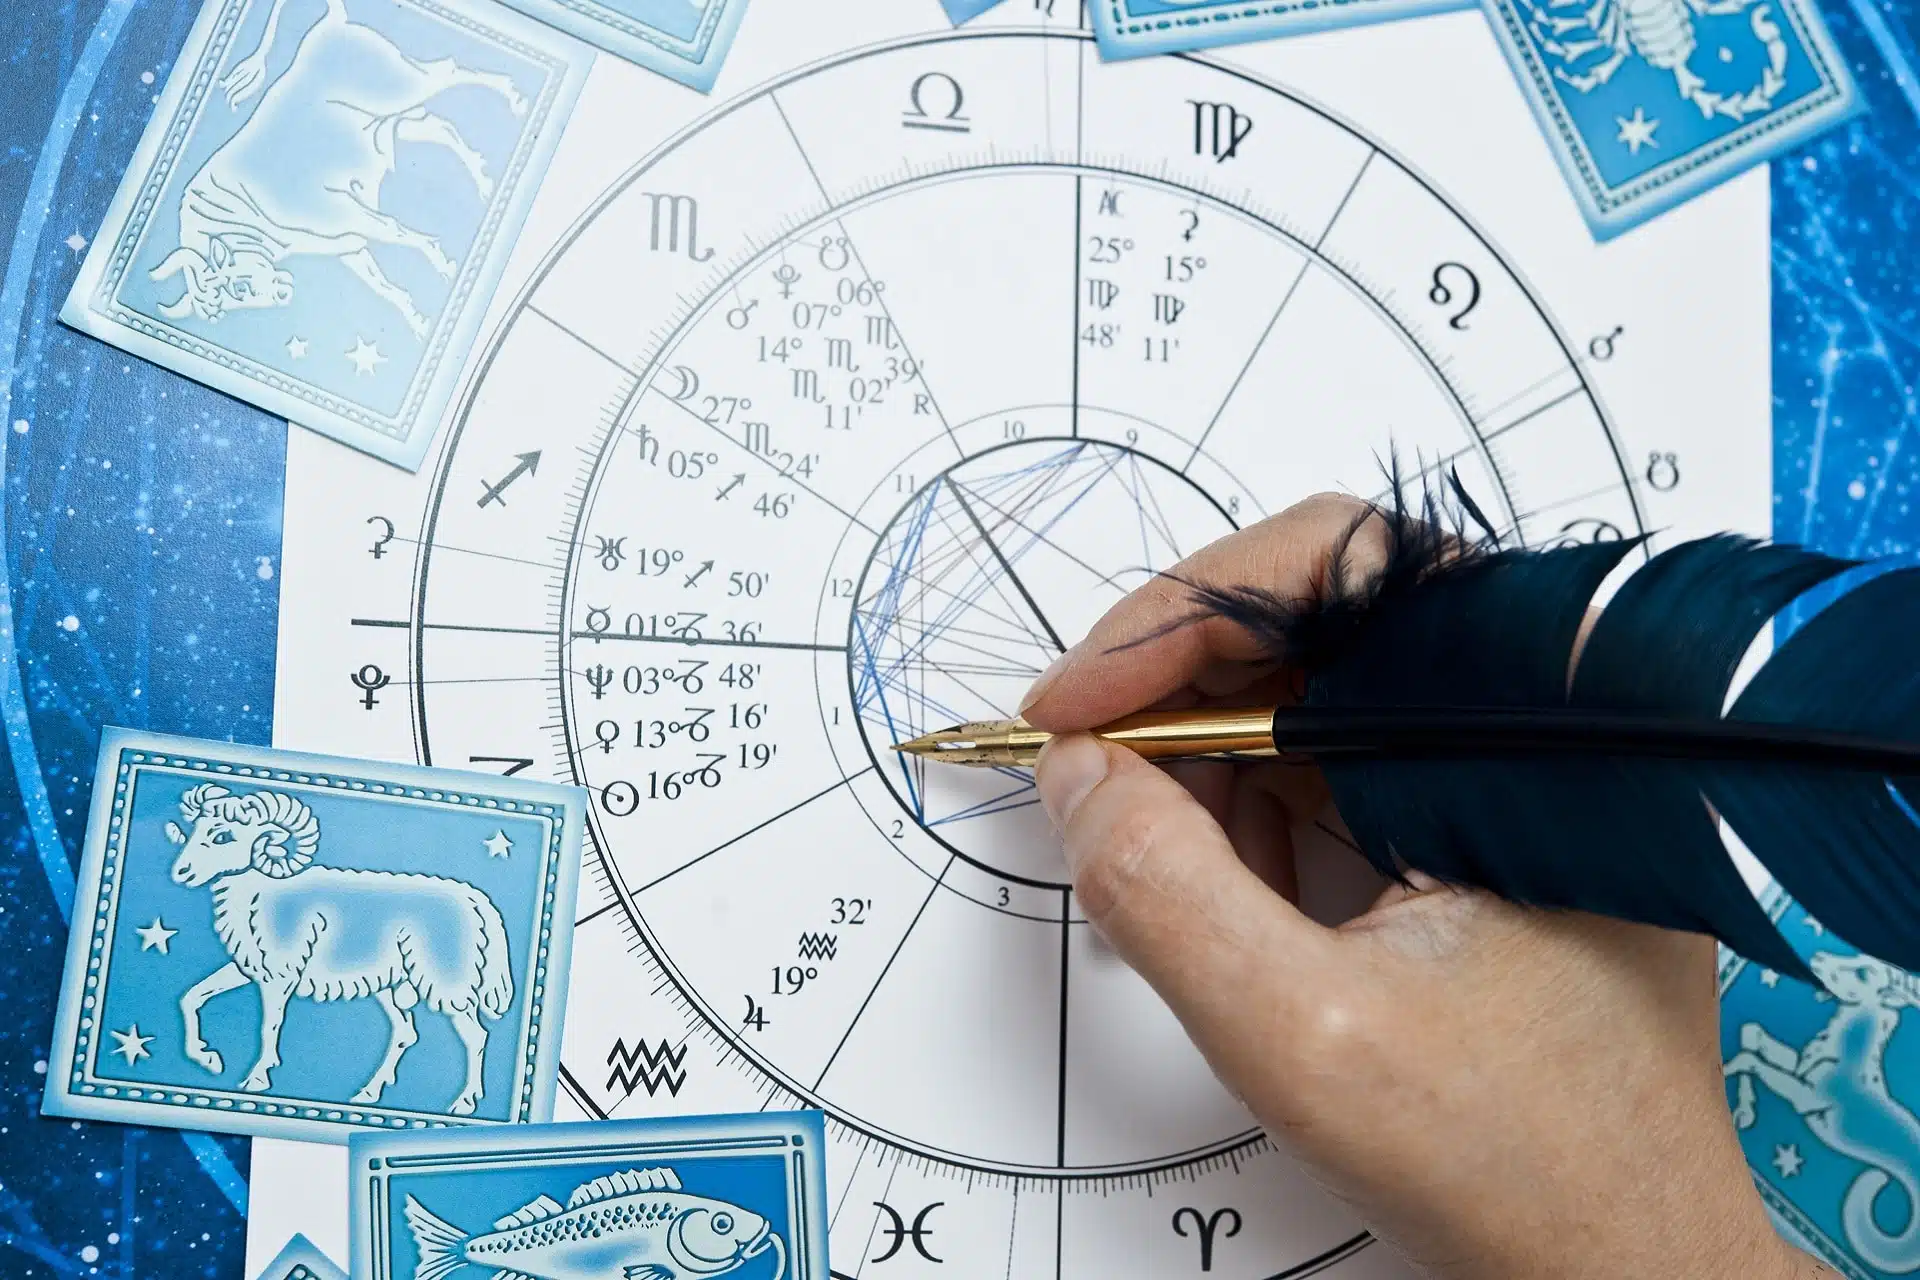 astrologer fortune teller with quill pen, horoscope, zodiac like astrology concept